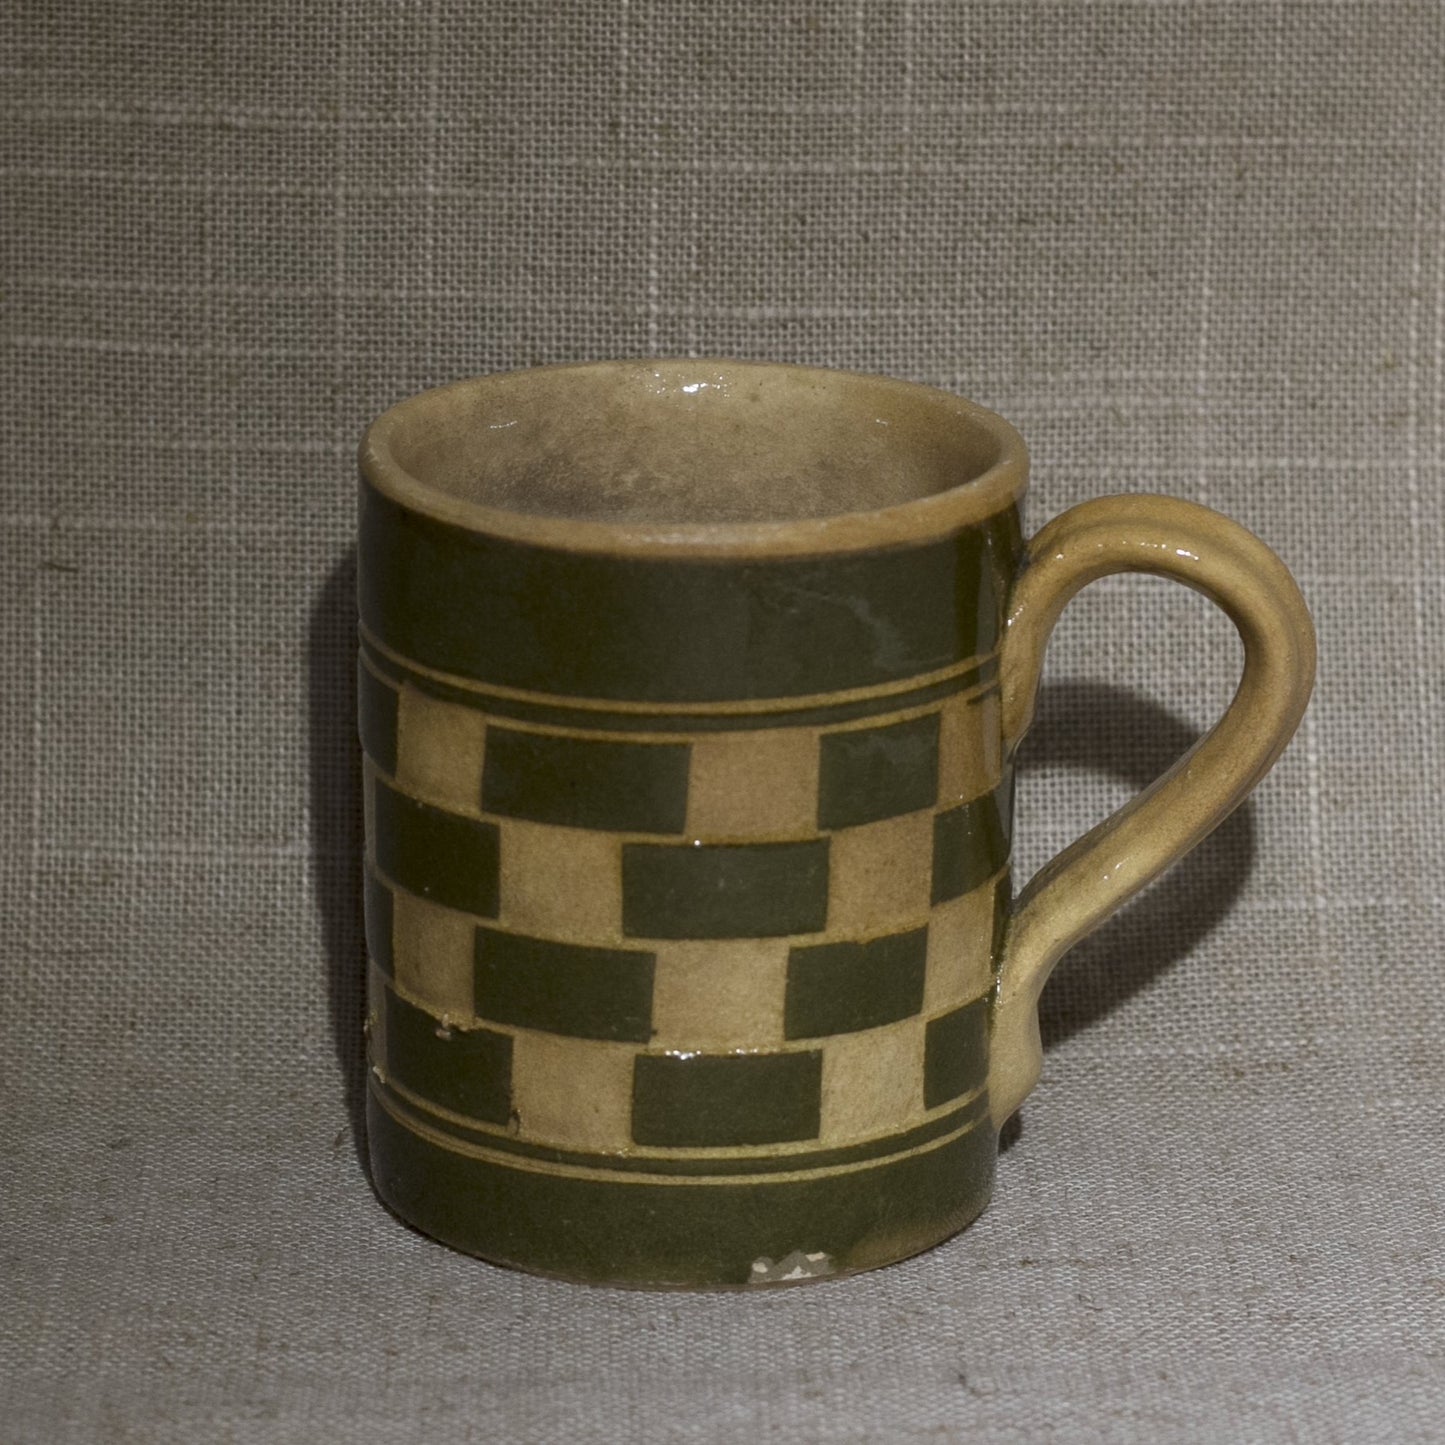 Antique English MOCHA WARE Mug with Tan and Olive Green Checkerboard Circa Early 19th Century